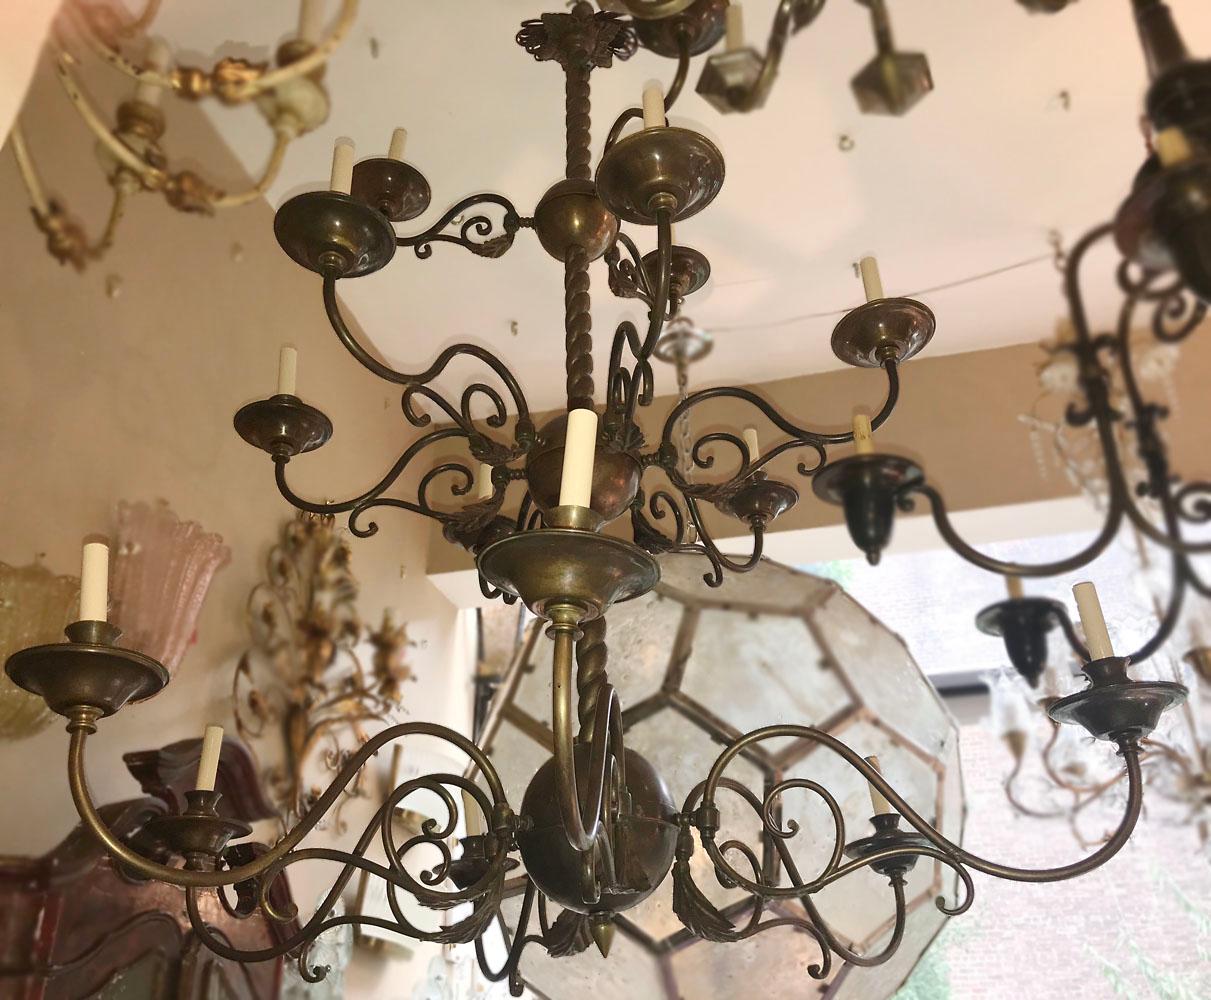 An Italian patinated bronze chandelier with double tier, foliage details on arms, original patina.
Measurements:
Height: 56